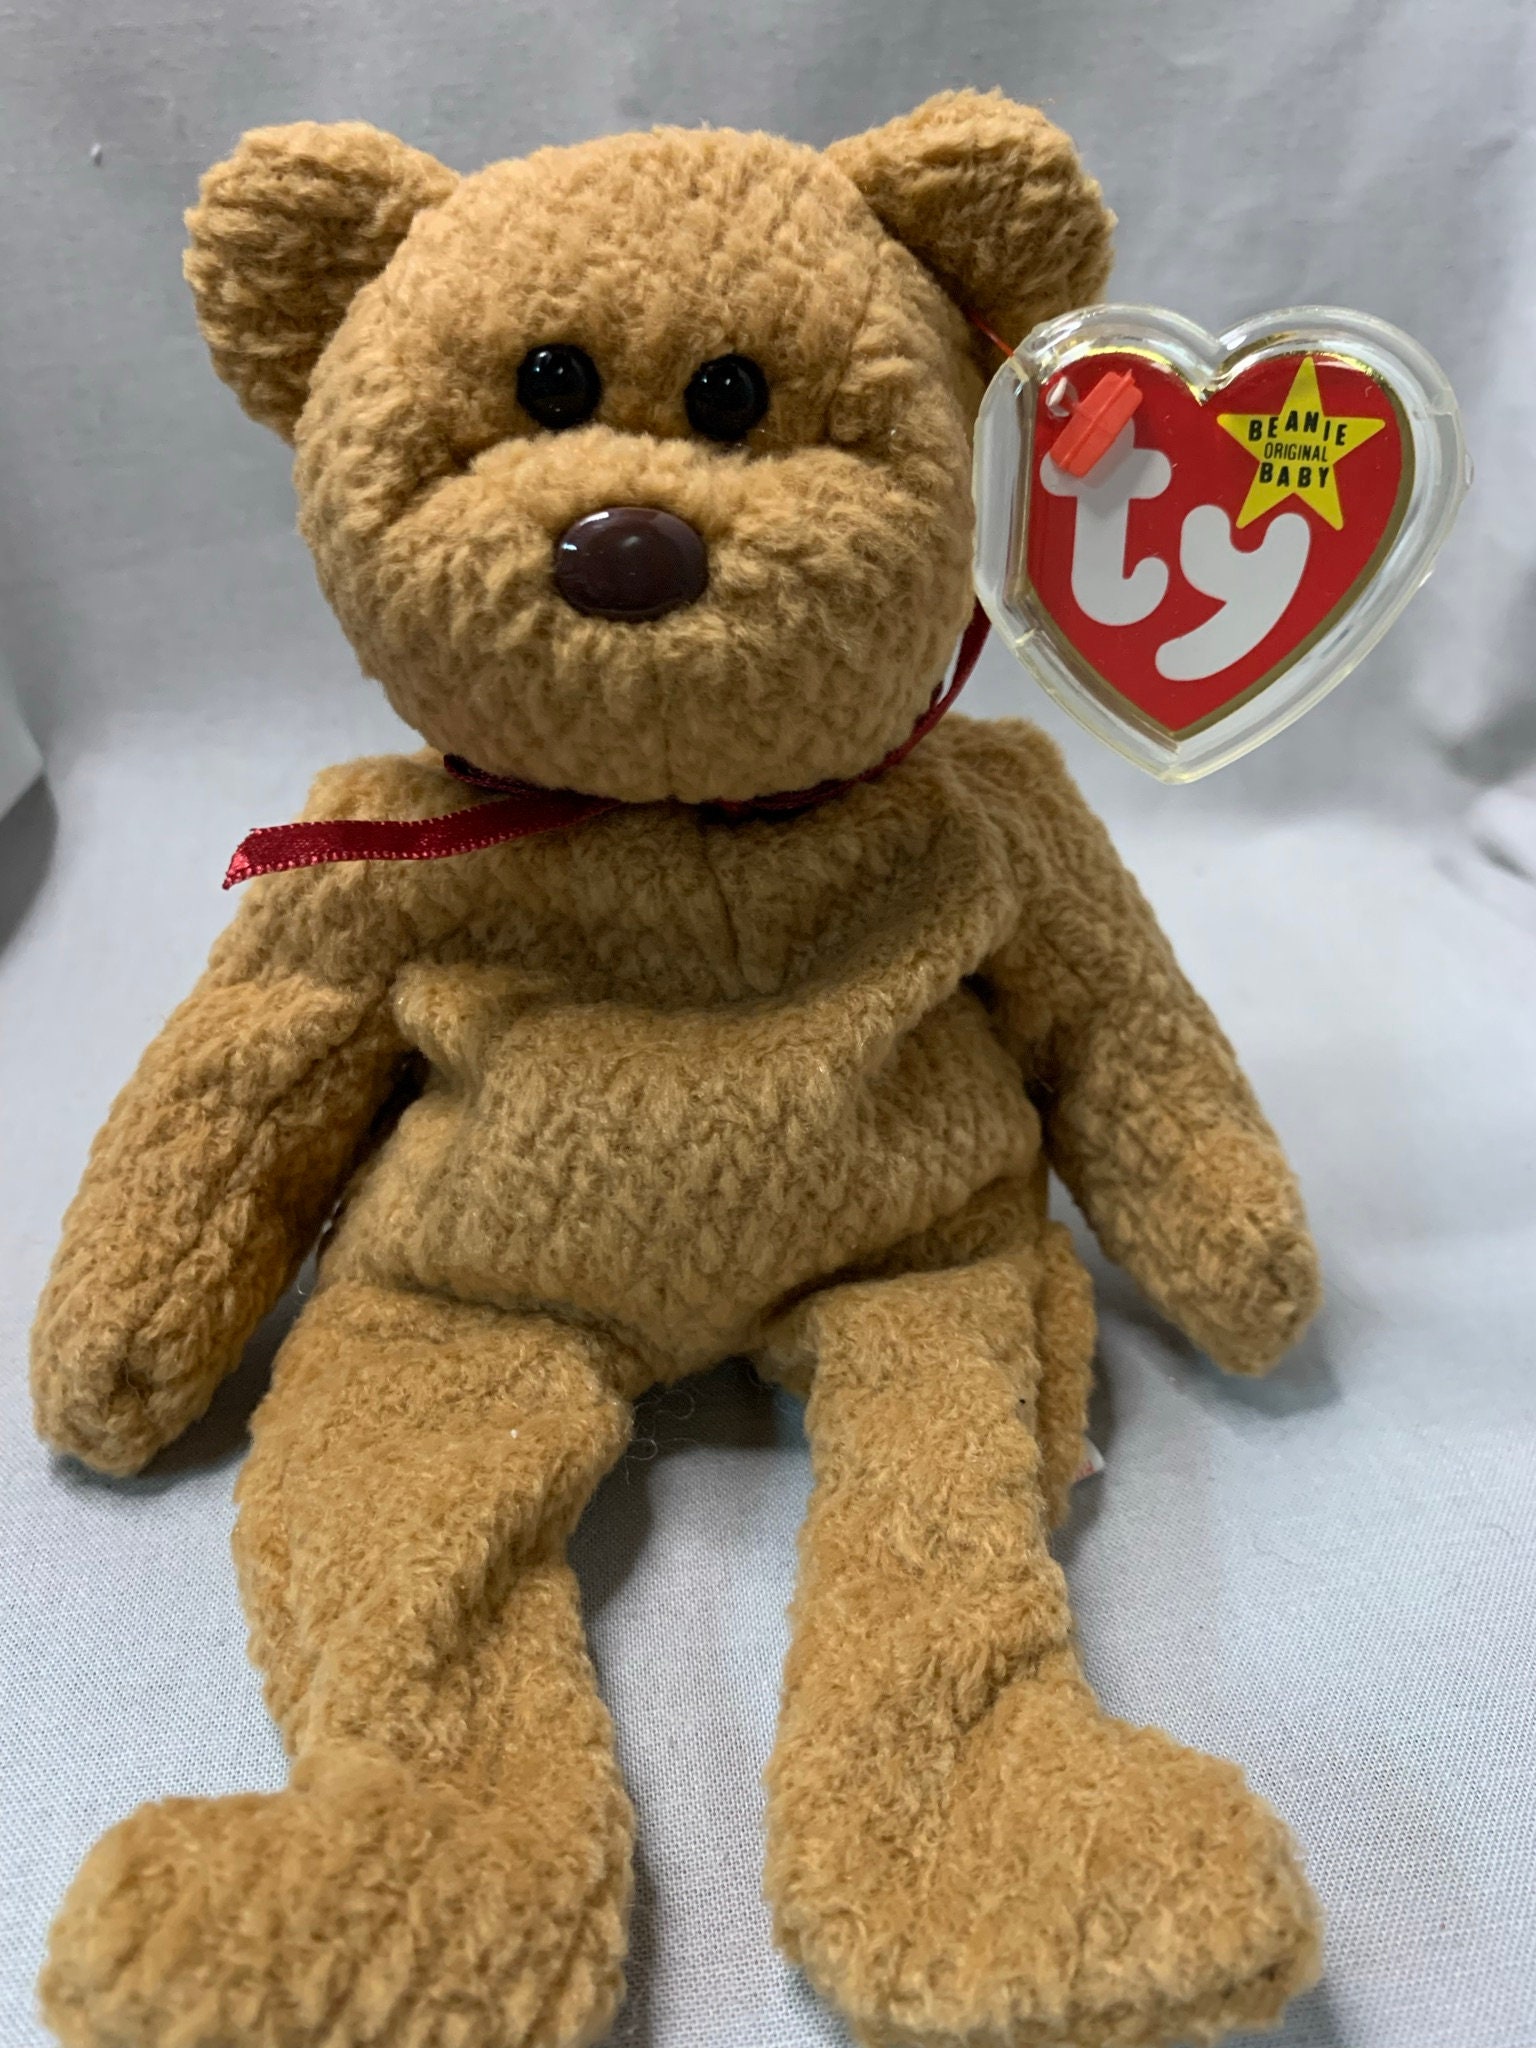 Ty Beanie Babies Curly The Bear Plush 4052 for sale online 